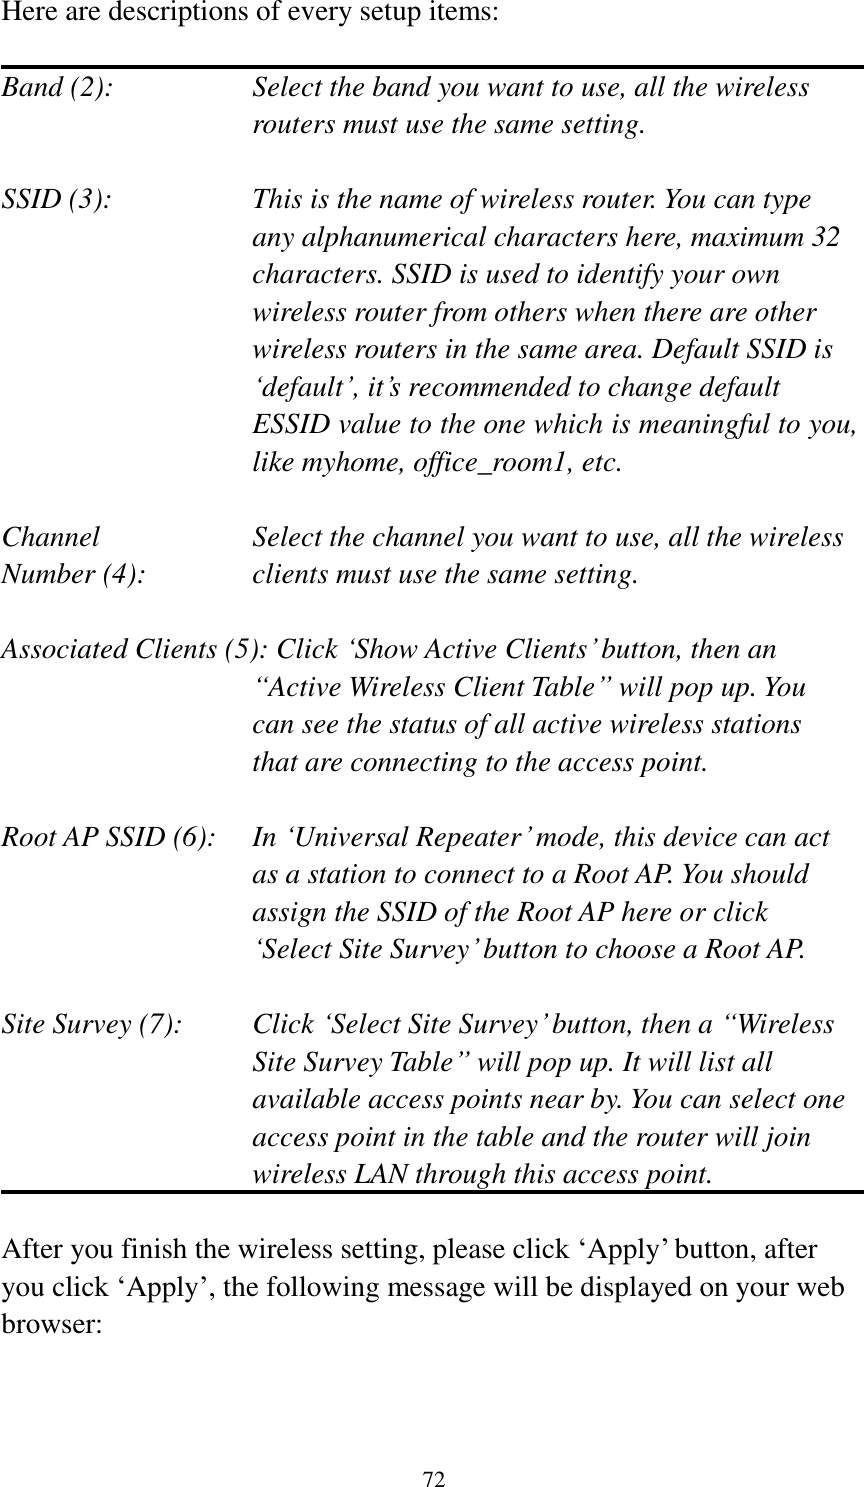 72 Here are descriptions of every setup items:  Band (2):  Select the band you want to use, all the wireless routers must use the same setting.  SSID (3):  This is the name of wireless router. You can type any alphanumerical characters here, maximum 32 characters. SSID is used to identify your own wireless router from others when there are other wireless routers in the same area. Default SSID is „default‟, it‟s recommended to change default ESSID value to the one which is meaningful to you, like myhome, office_room1, etc.  Channel  Select the channel you want to use, all the wireless Number (4):  clients must use the same setting.  Associated Clients (5): Click „Show Active Clients‟ button, then an “Active Wireless Client Table” will pop up. You can see the status of all active wireless stations that are connecting to the access point.  Root AP SSID (6):  In „Universal Repeater‟ mode, this device can act as a station to connect to a Root AP. You should assign the SSID of the Root AP here or click „Select Site Survey‟ button to choose a Root AP.  Site Survey (7):  Click „Select Site Survey‟ button, then a “Wireless Site Survey Table” will pop up. It will list all available access points near by. You can select one access point in the table and the router will join wireless LAN through this access point.  After you finish the wireless setting, please click „Apply‟ button, after you click „Apply‟, the following message will be displayed on your web browser:  